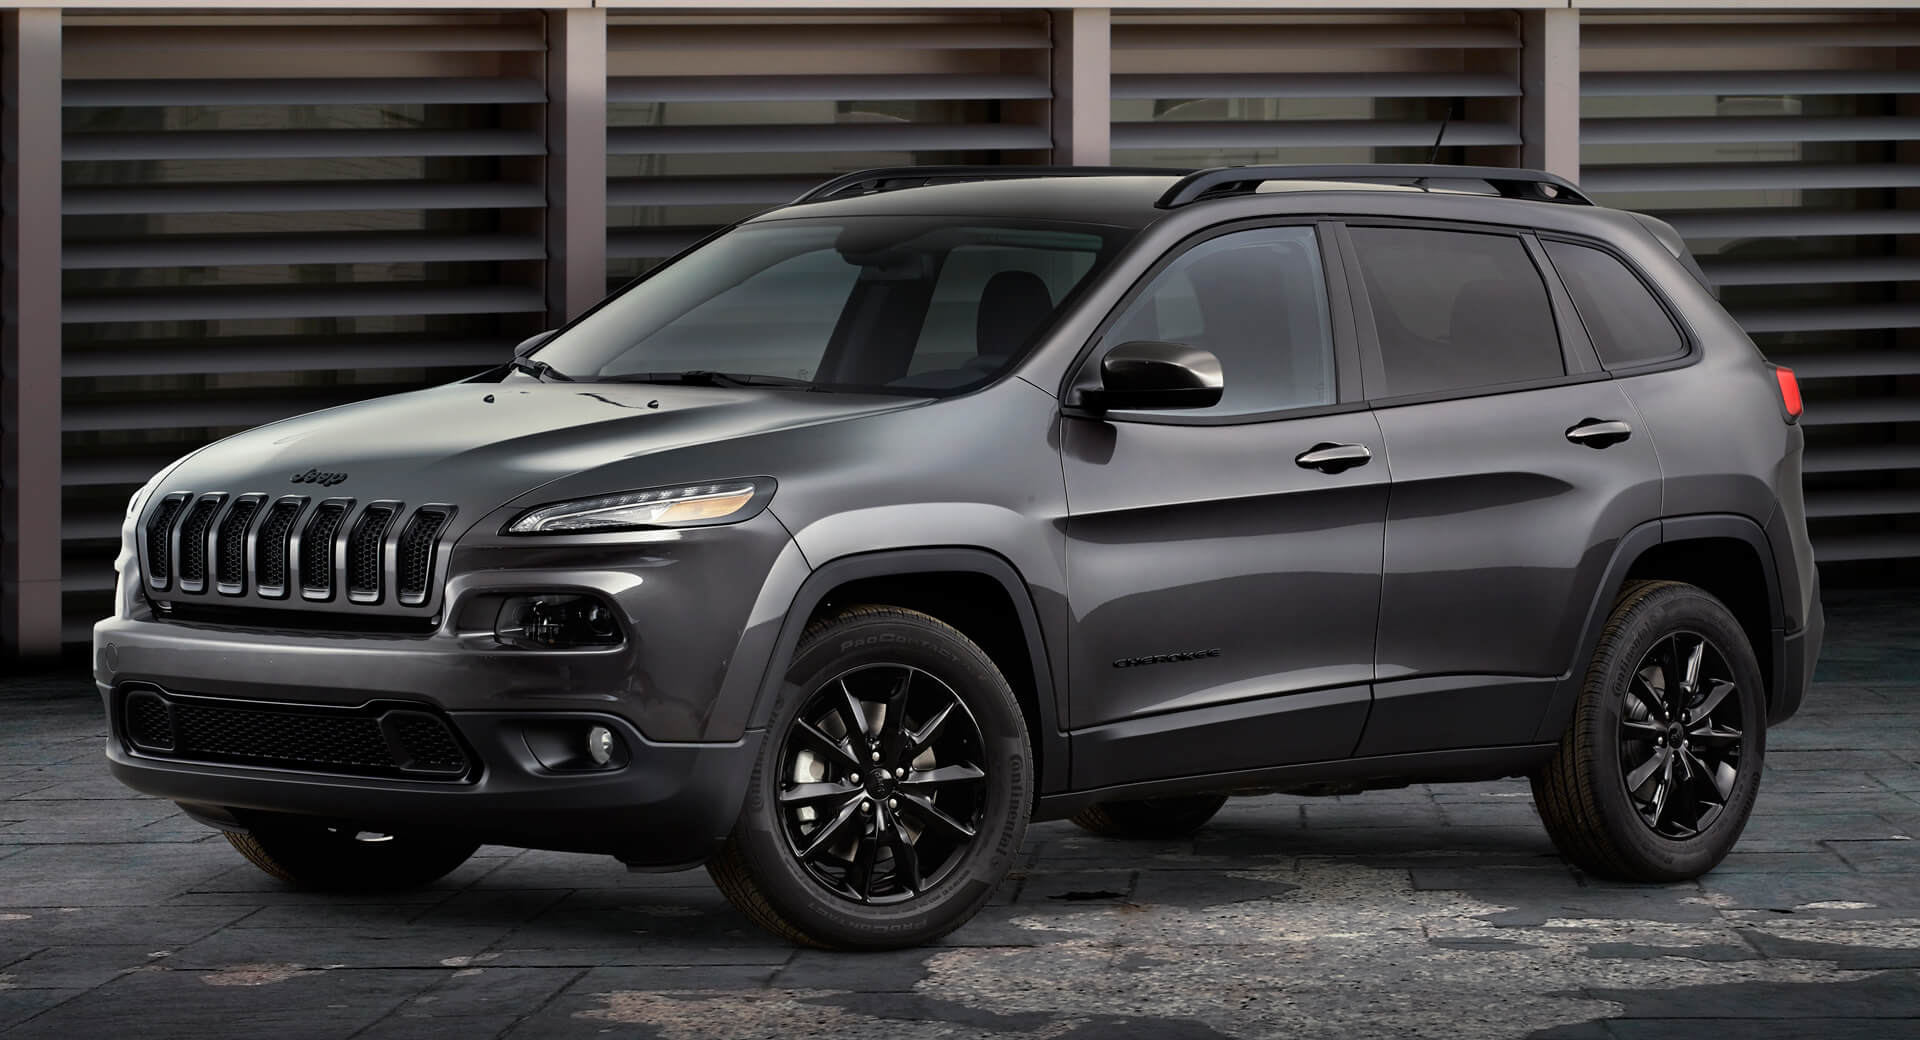 2014-2017 Jeep Cherokee Recalled Over Serious Transmission Issues |  Carscoops